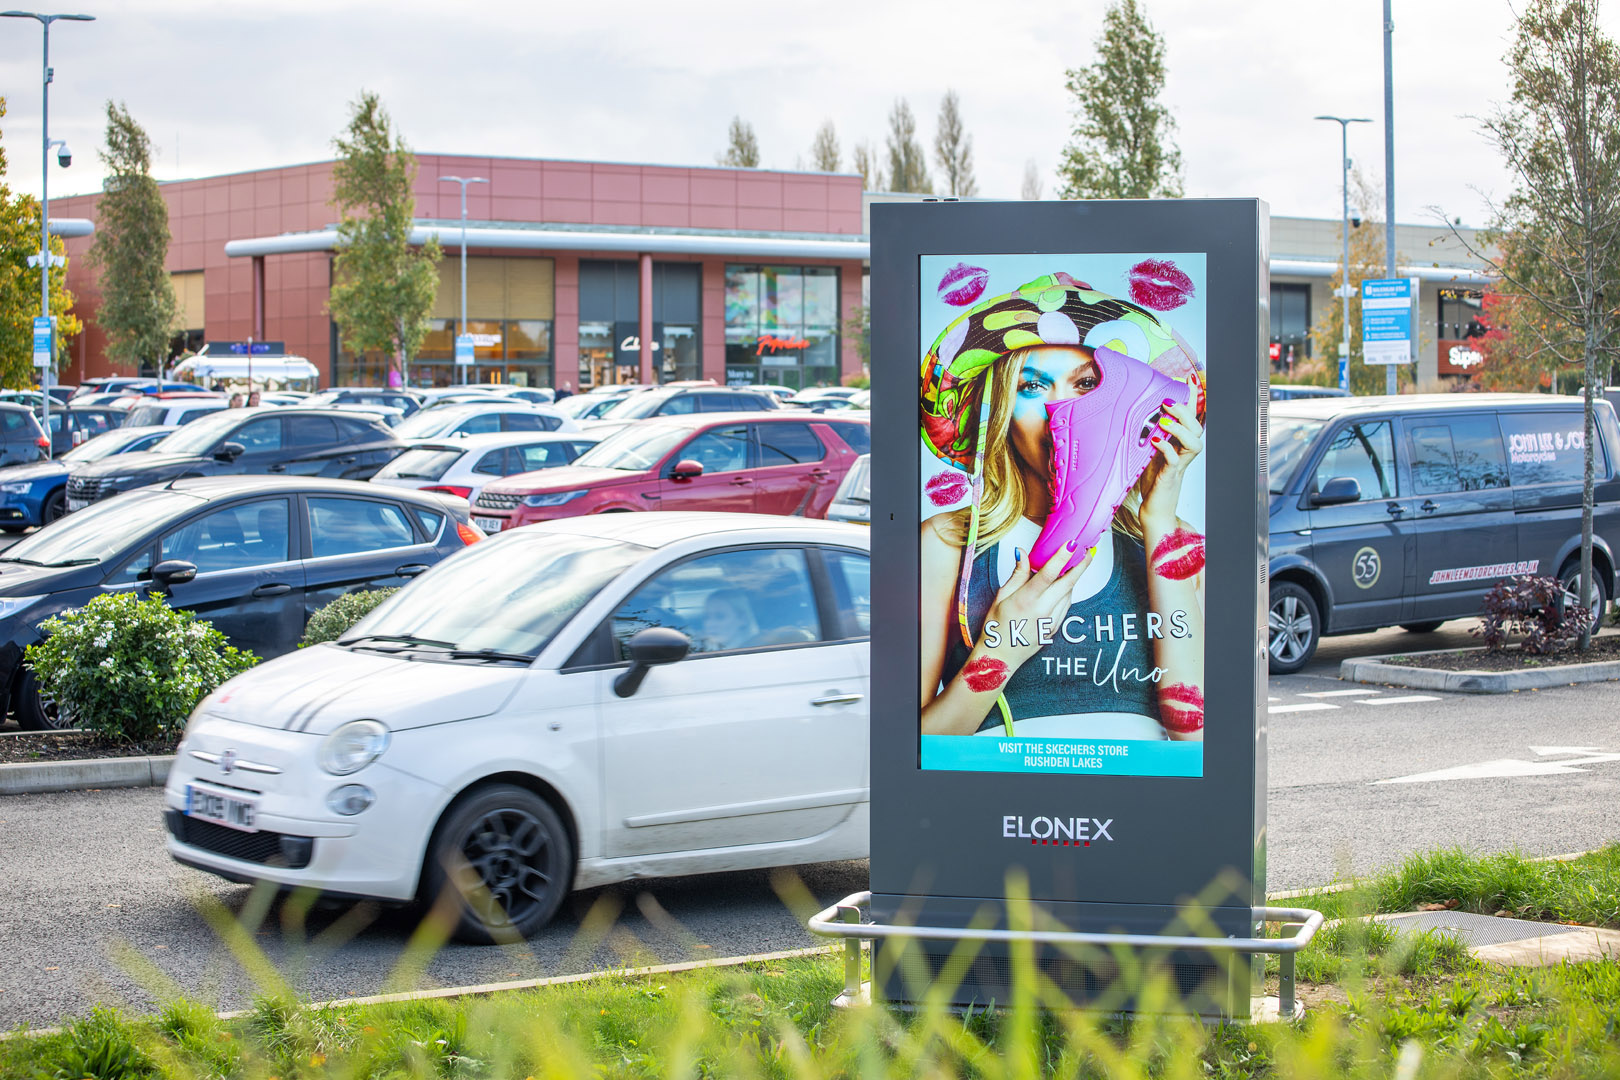 New DOOH Network Launched at Rushden Lakes in Northamptonshire